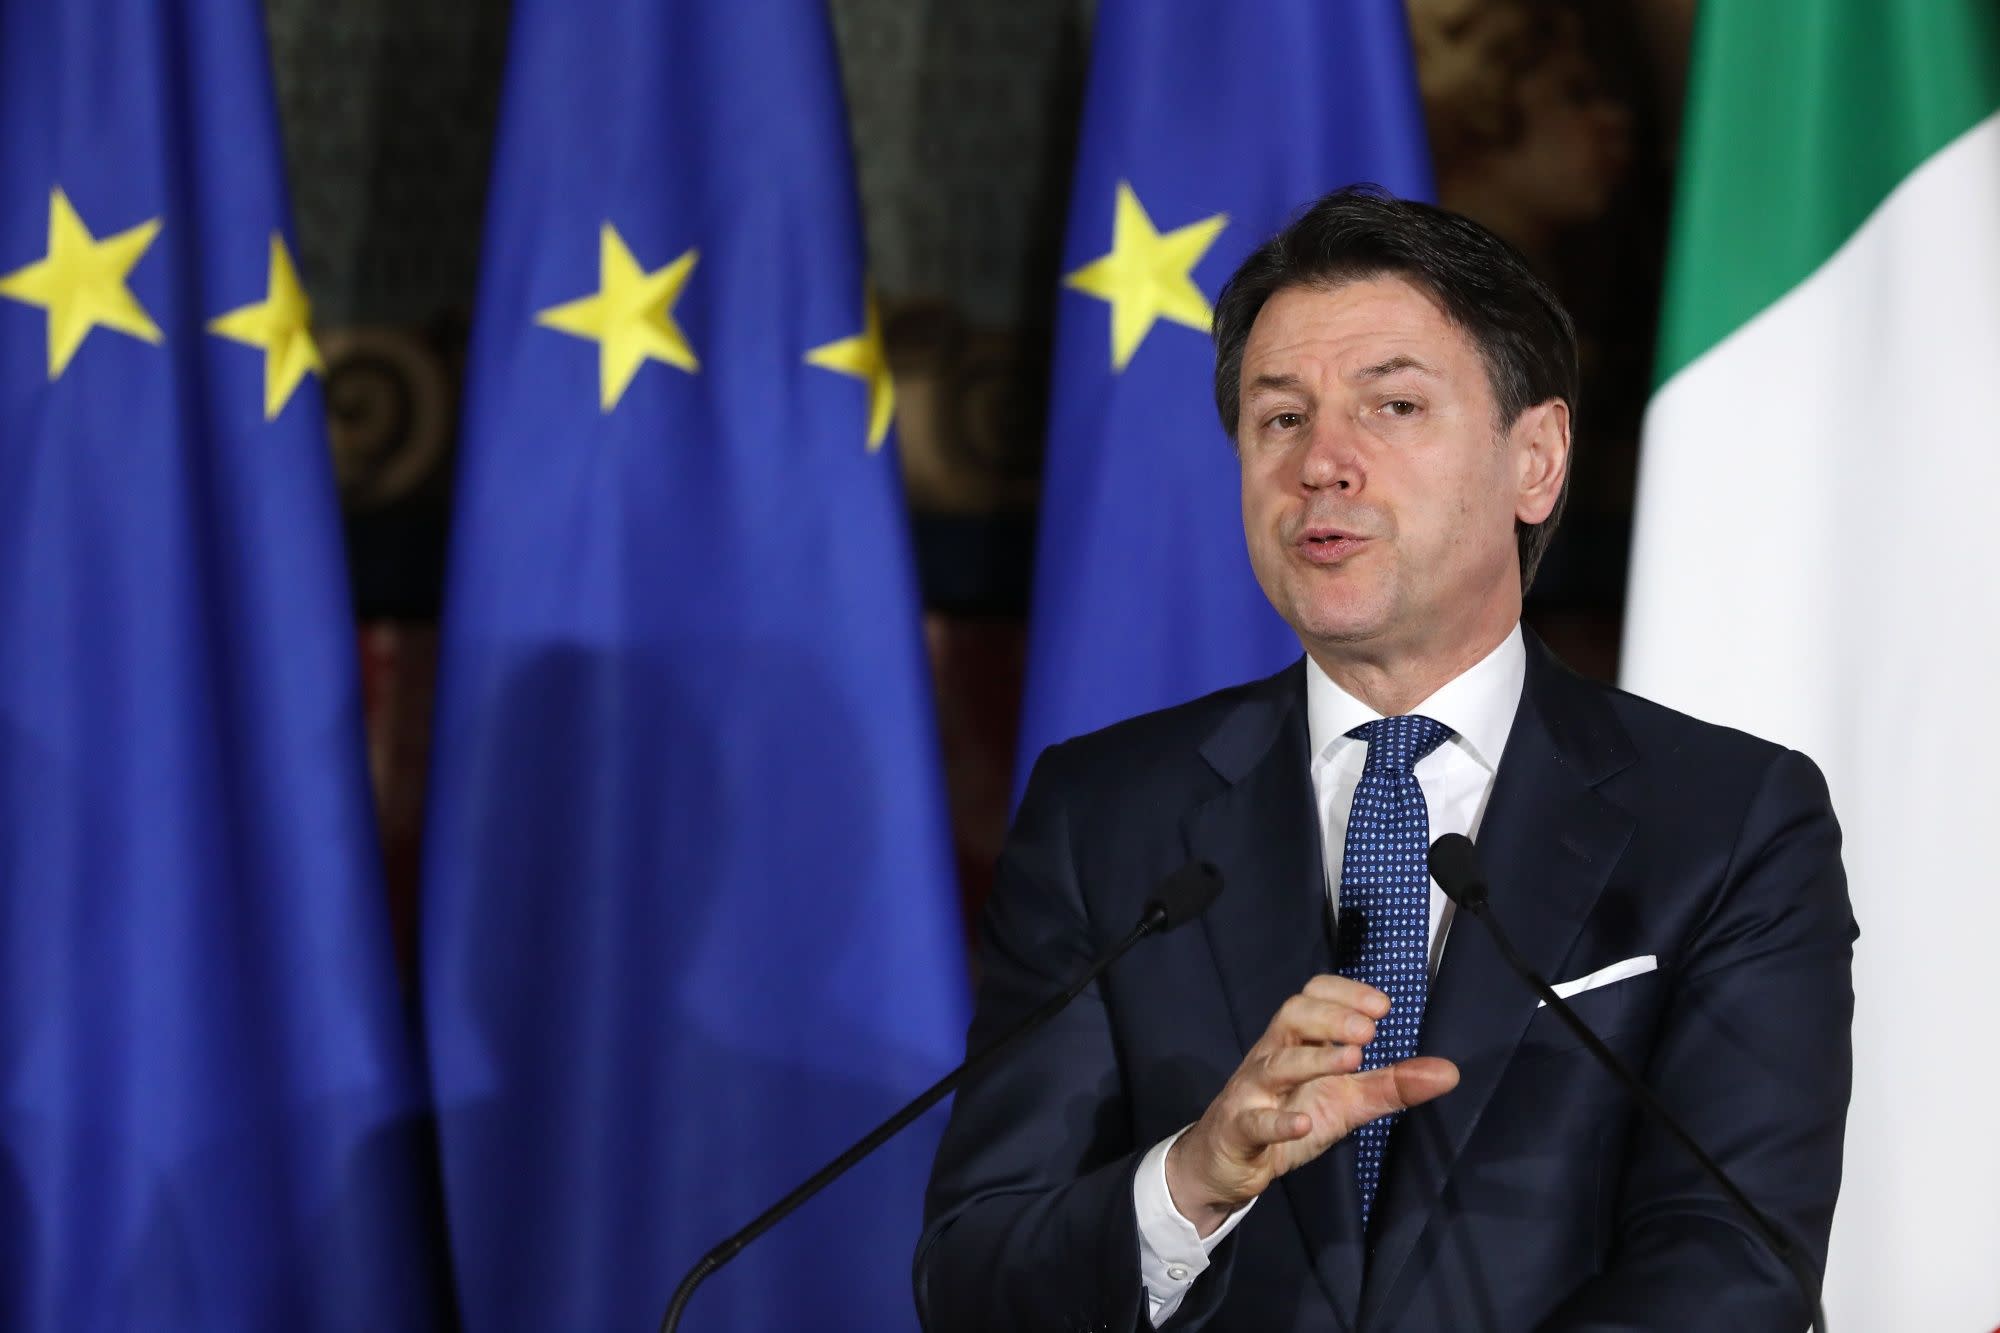 Italy Business Elite Gets a Taste of Government Intervention